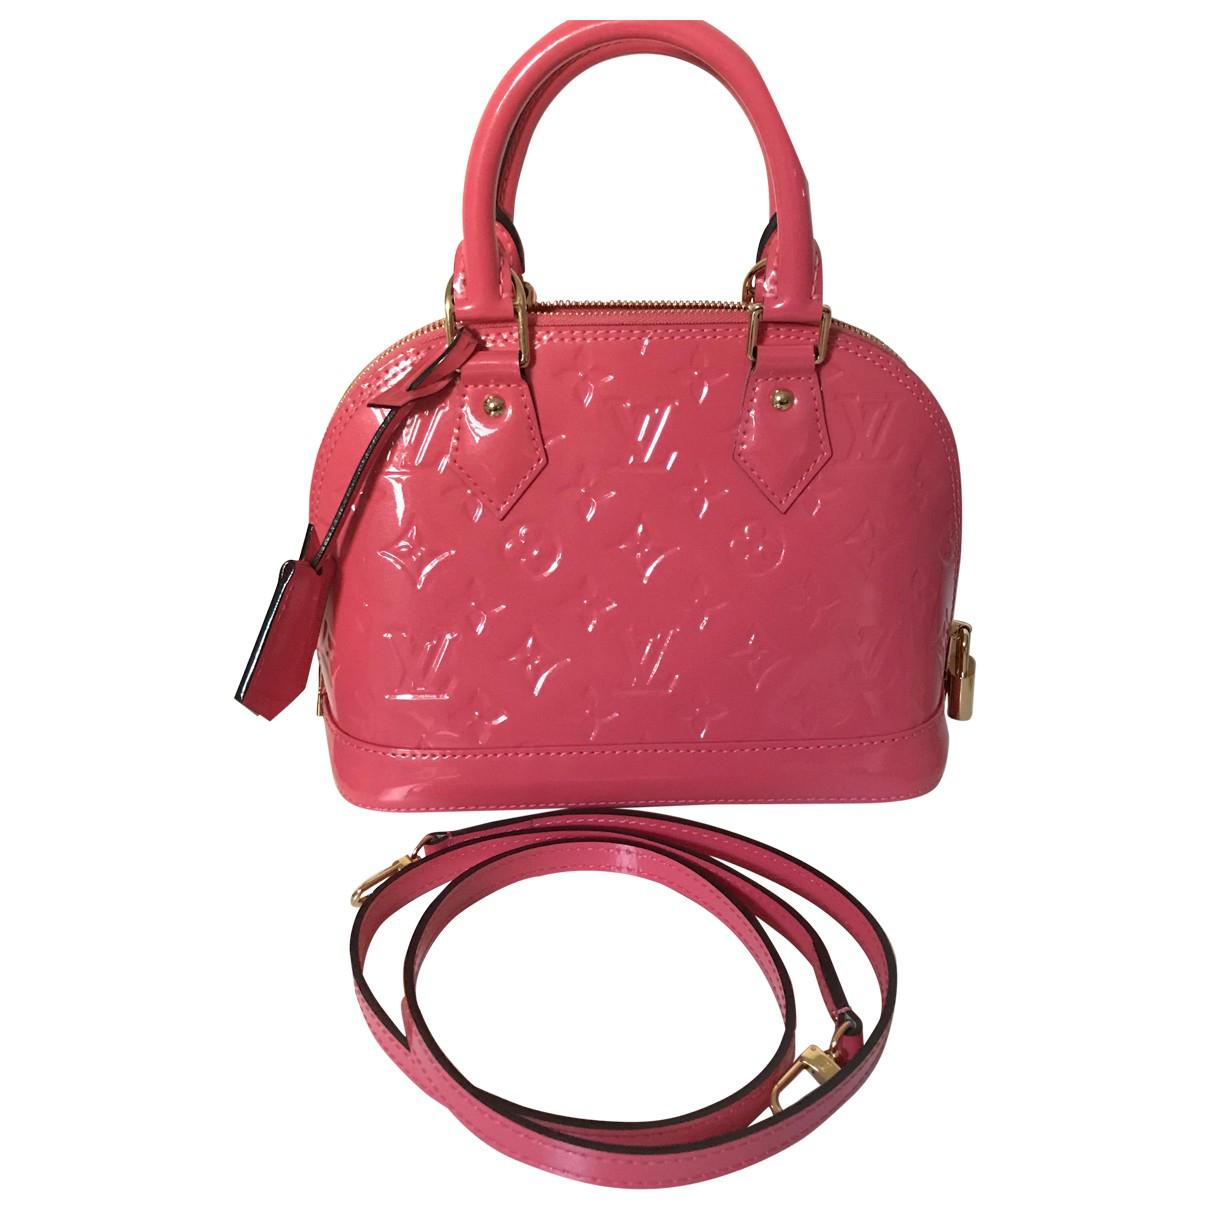 Louis Vuitton Alma Bb Patent Leather Crossbody Bag in Pink - Lyst